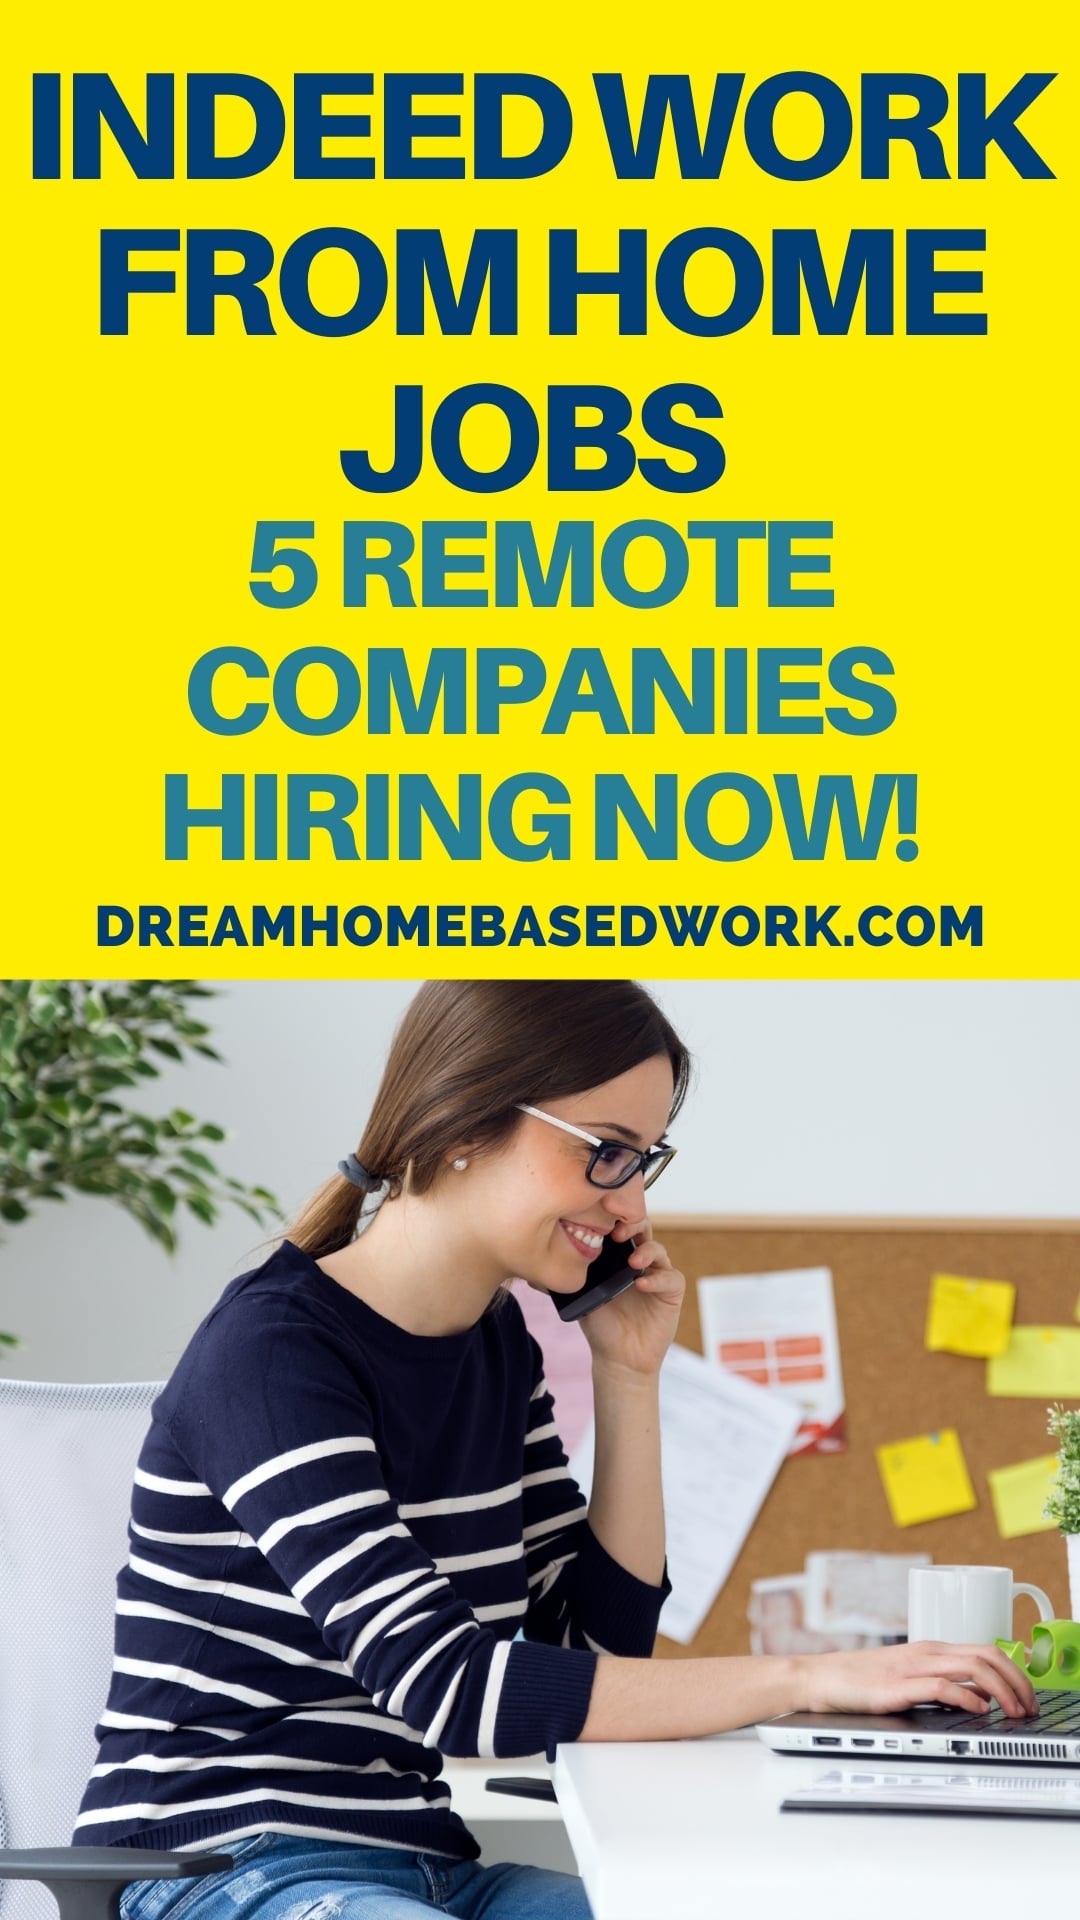 Indeed Work from Home Jobs: 5 Remote Companies Hiring Now!